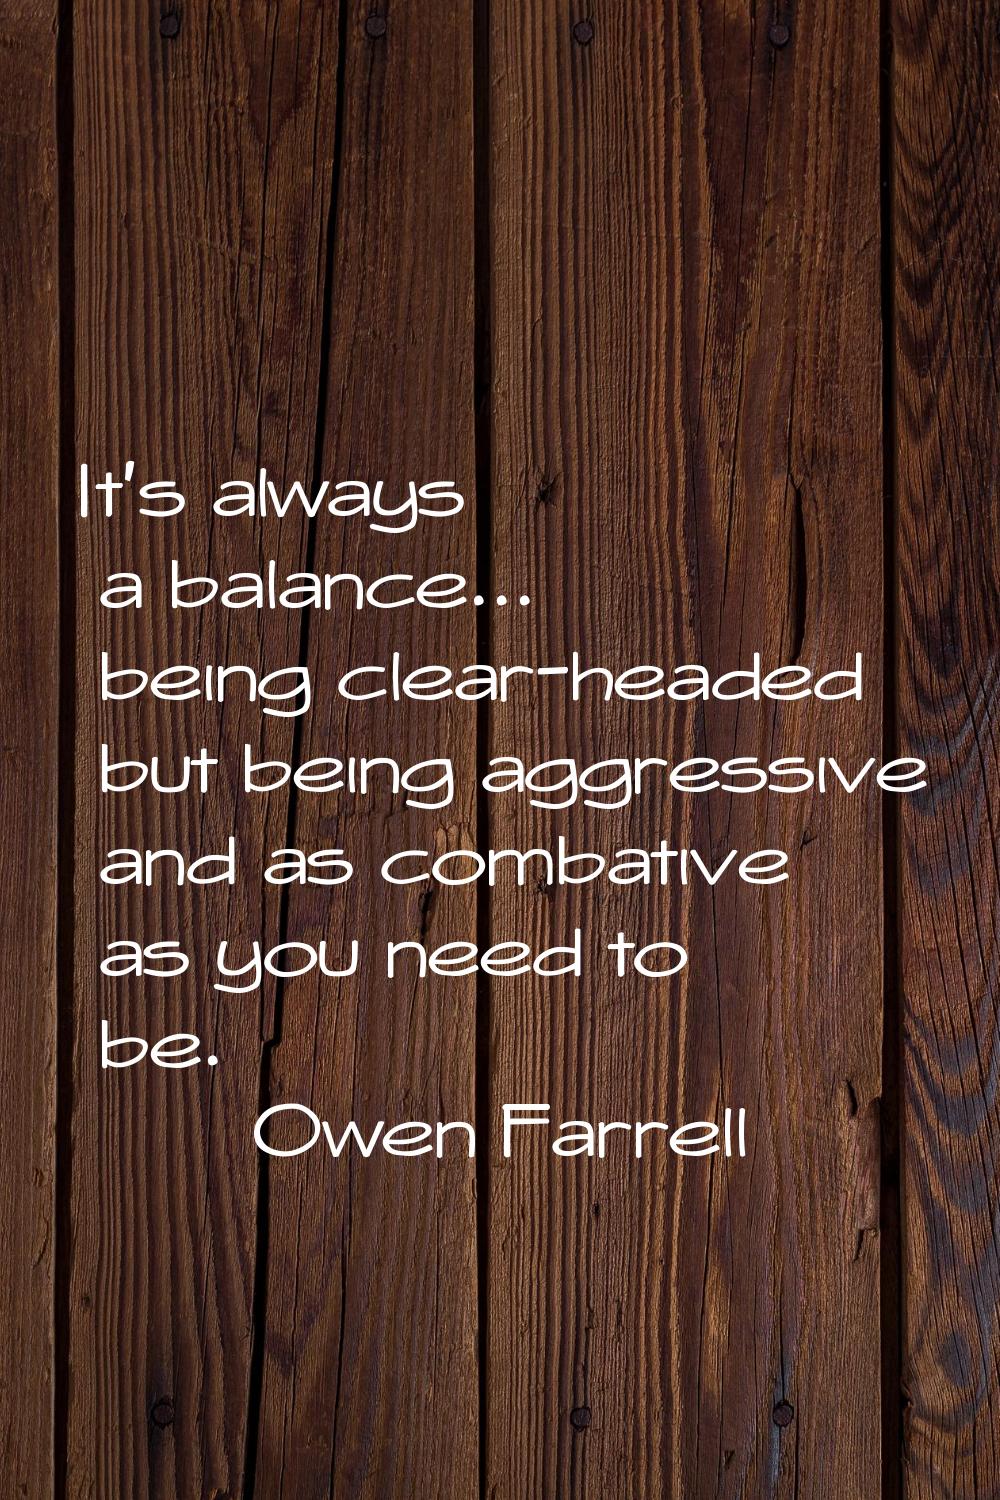 It's always a balance... being clear-headed but being aggressive and as combative as you need to be